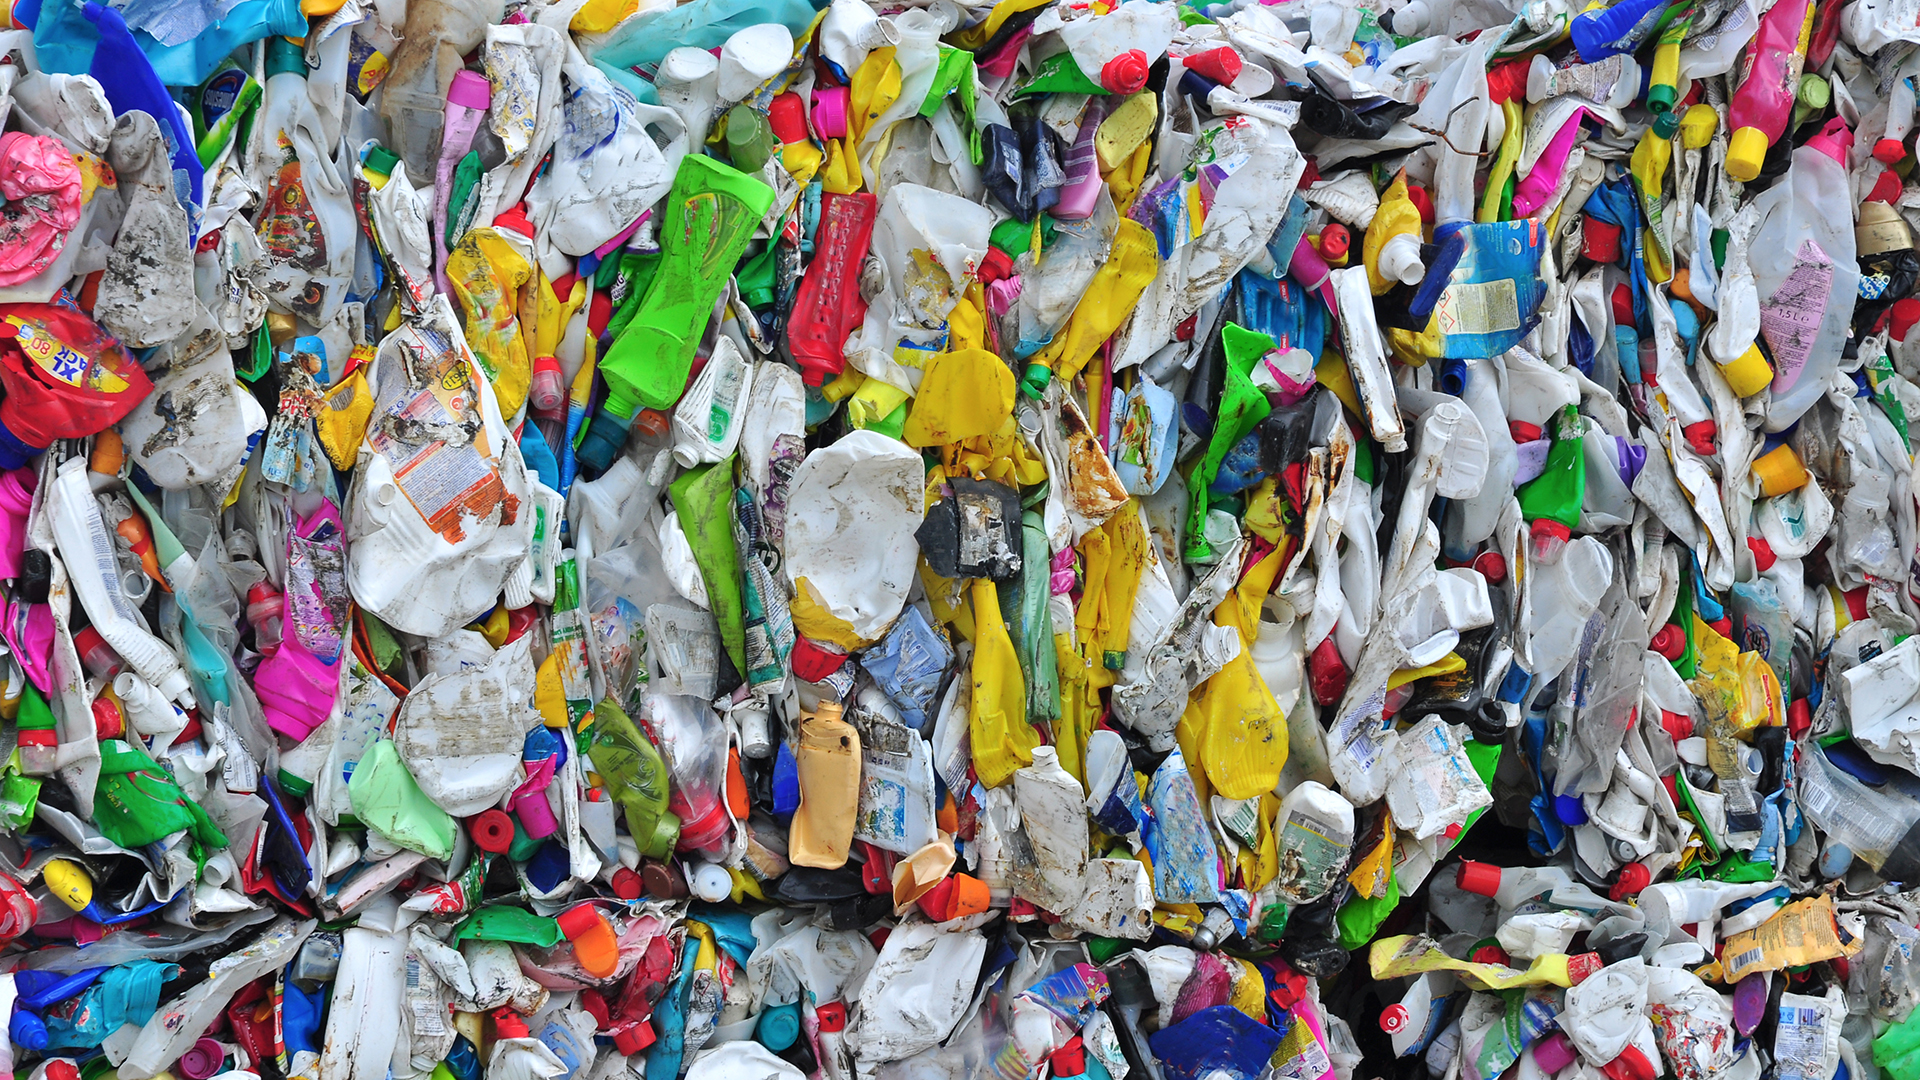 Plastics2Olefins project: Recycling plastic waste into high-value materials